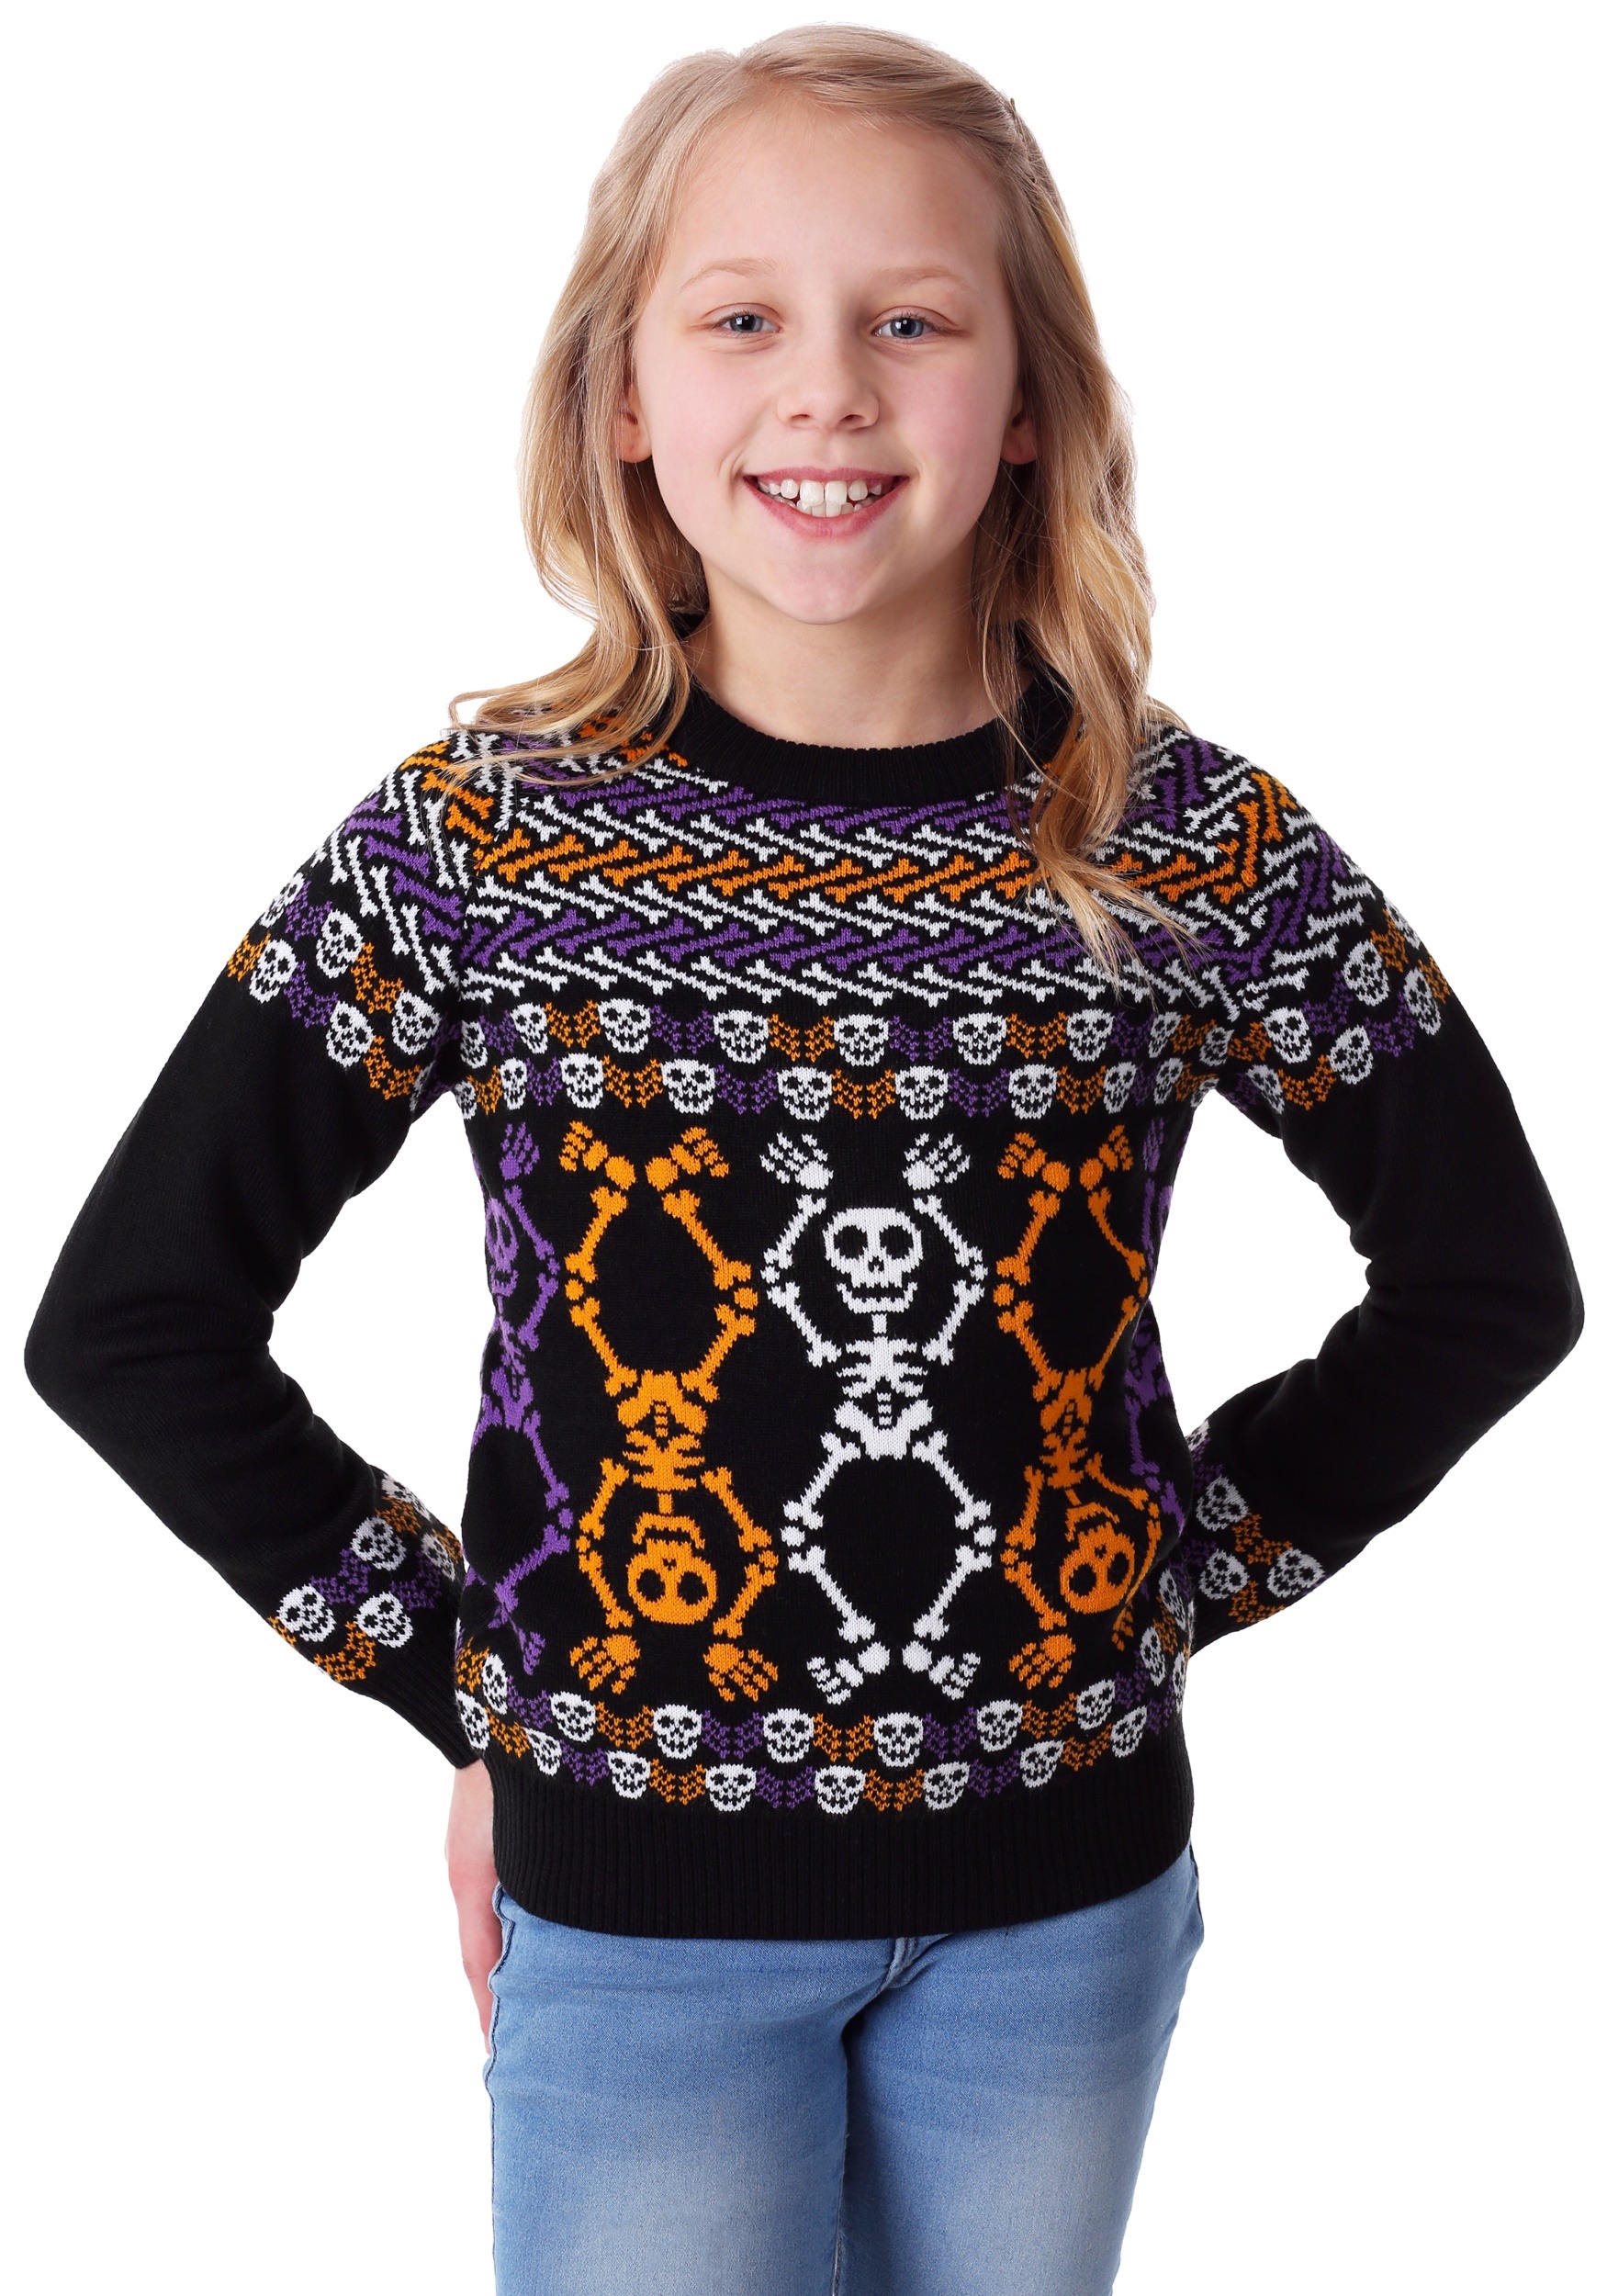 Kids Day of the Dead Dancing Skeletons Ugly Halloween Sweater